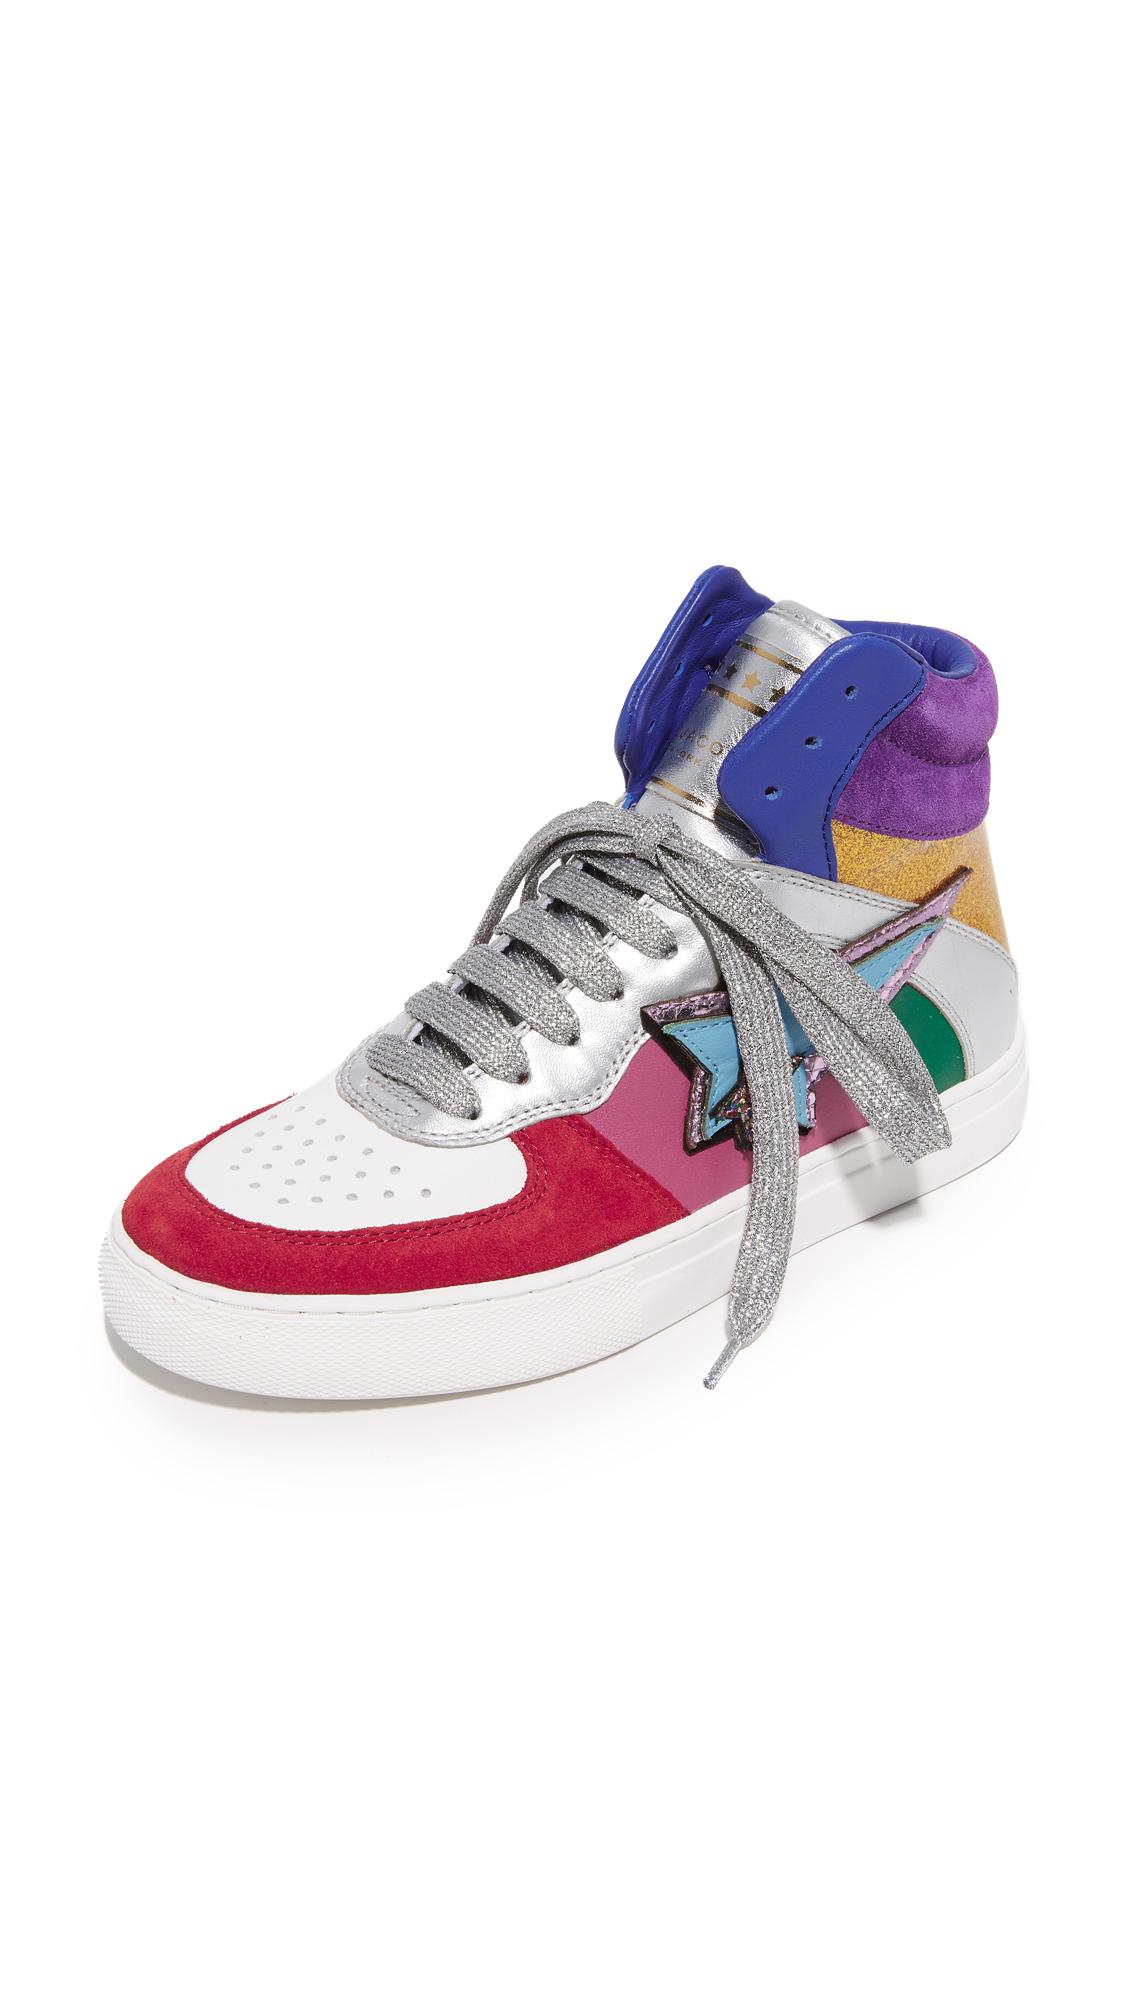 Lyst - Marc Jacobs Eclipse High Top Sneakers